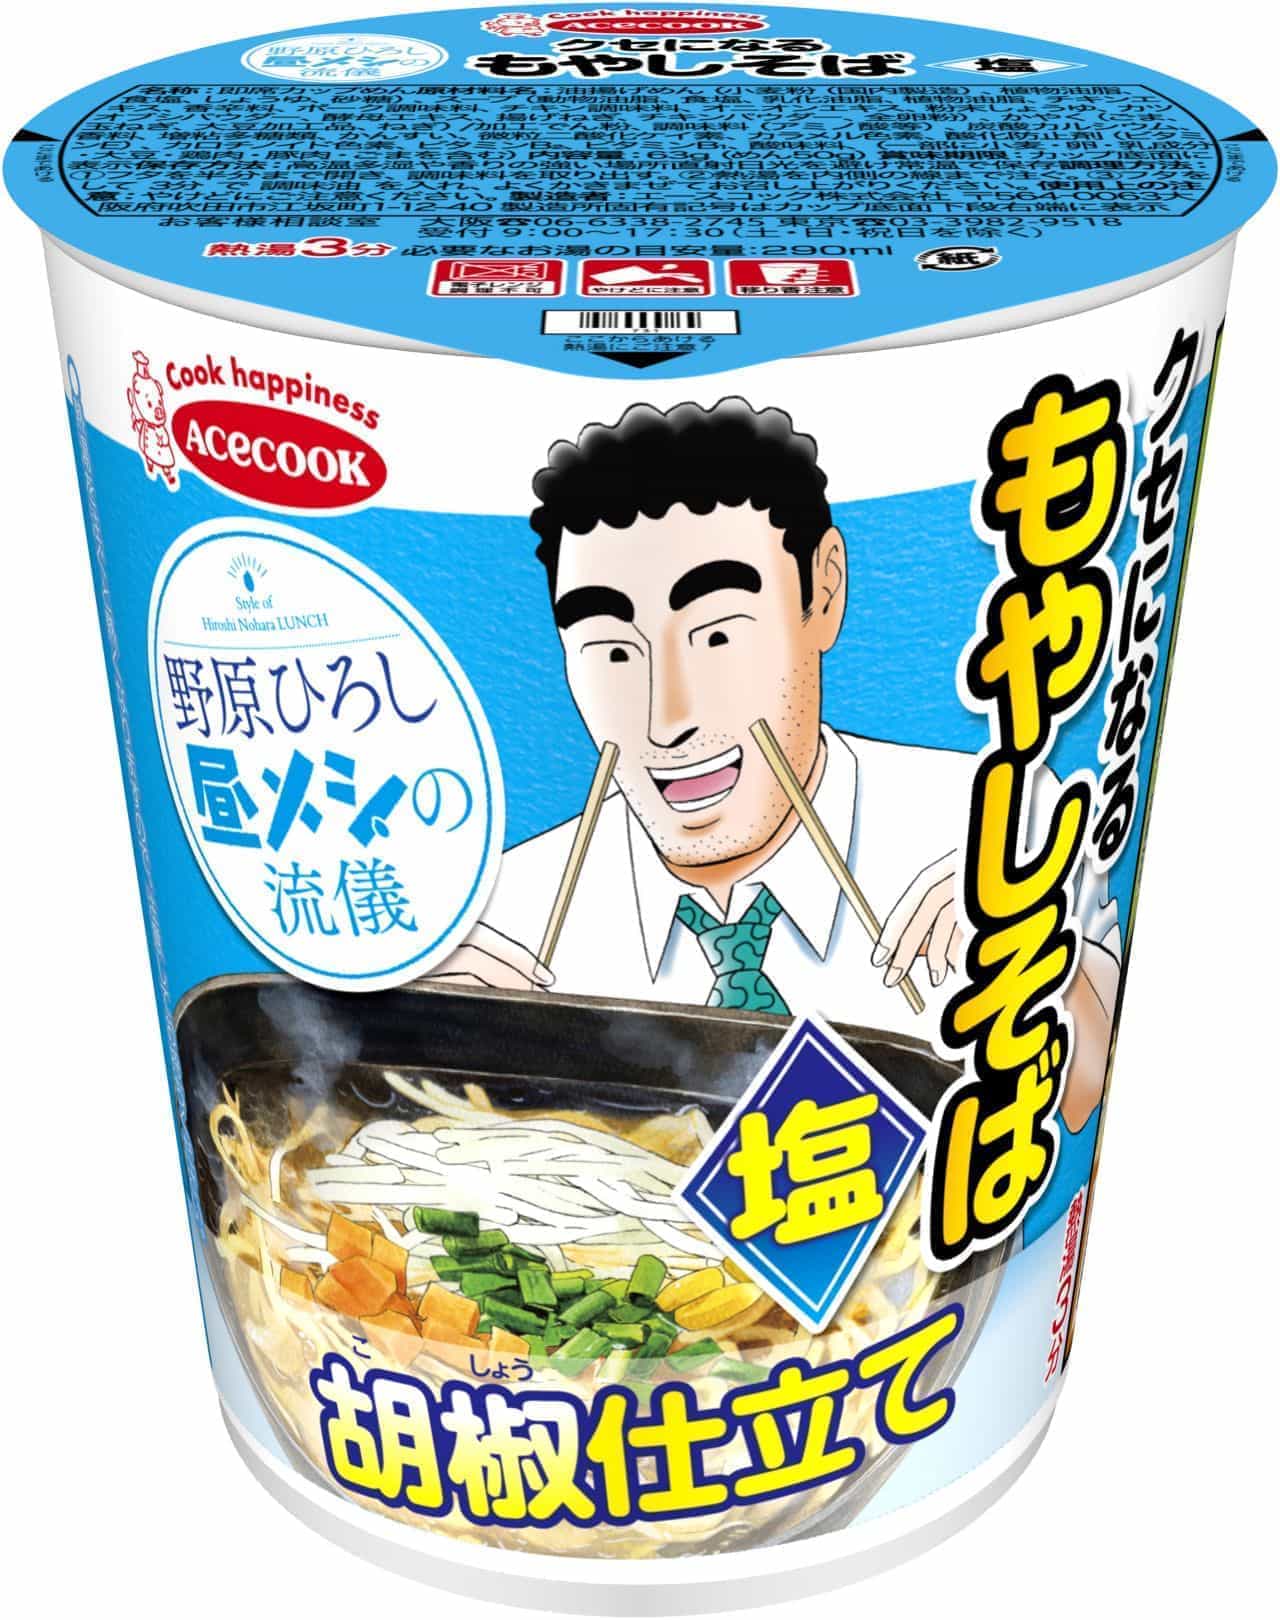 Acecook "Hiroshi Nohara, bean sprout soba salt that becomes a habit of lunch meal"